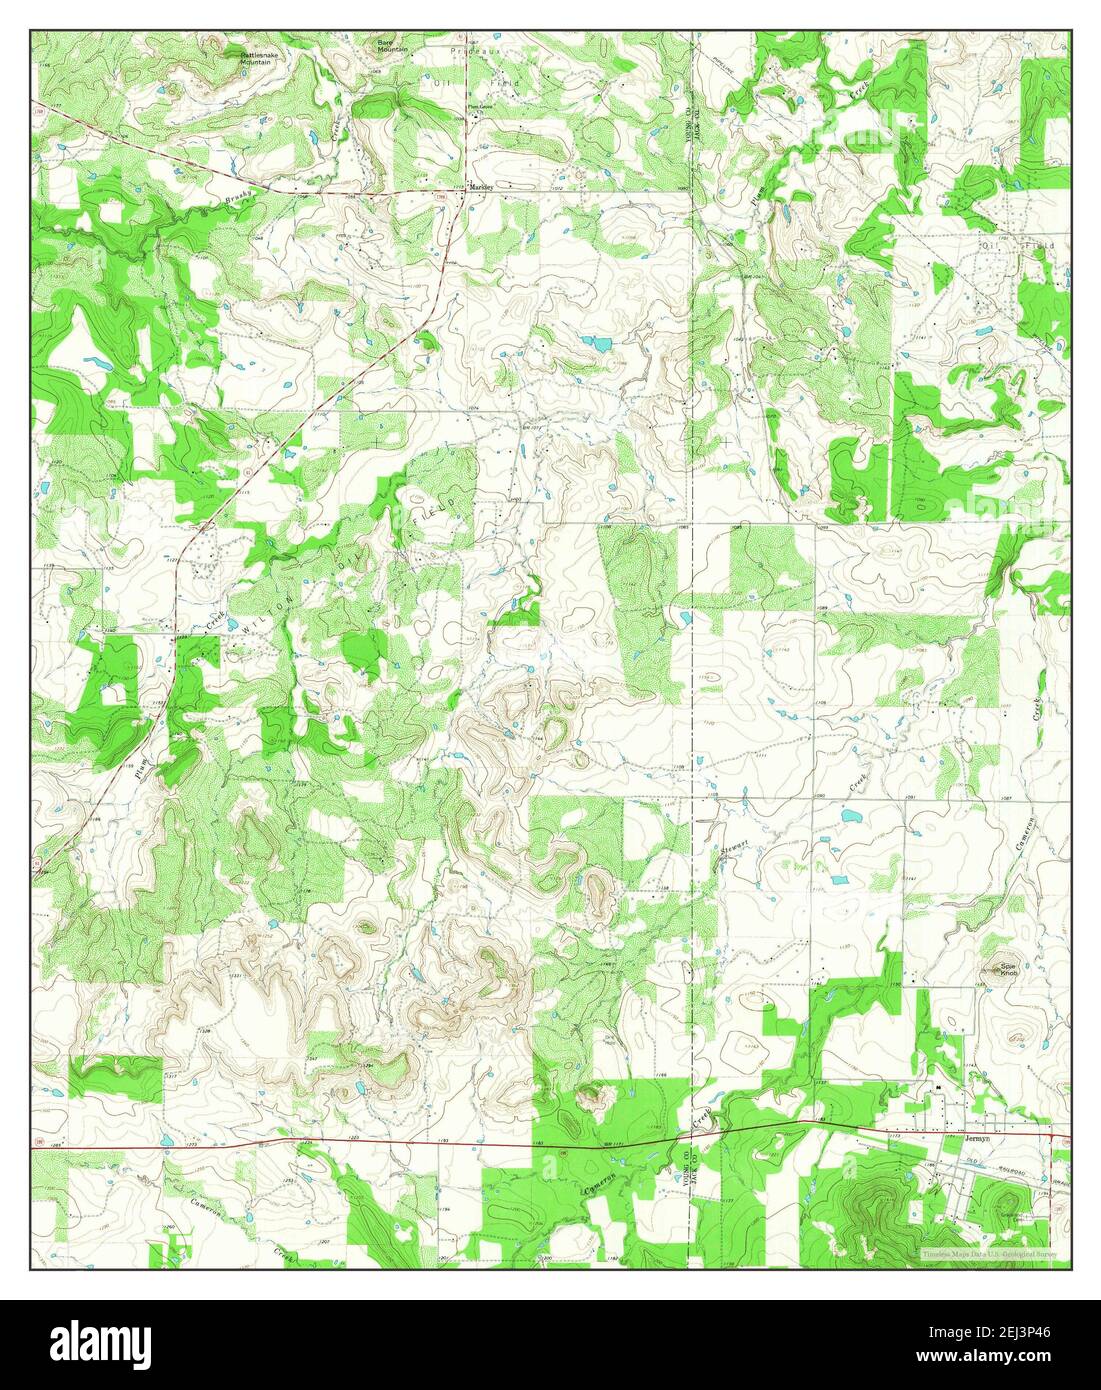 Markley, Texas, map 1964, 1:24000, United States of America by Timeless Maps, data U.S. Geological Survey Stock Photo